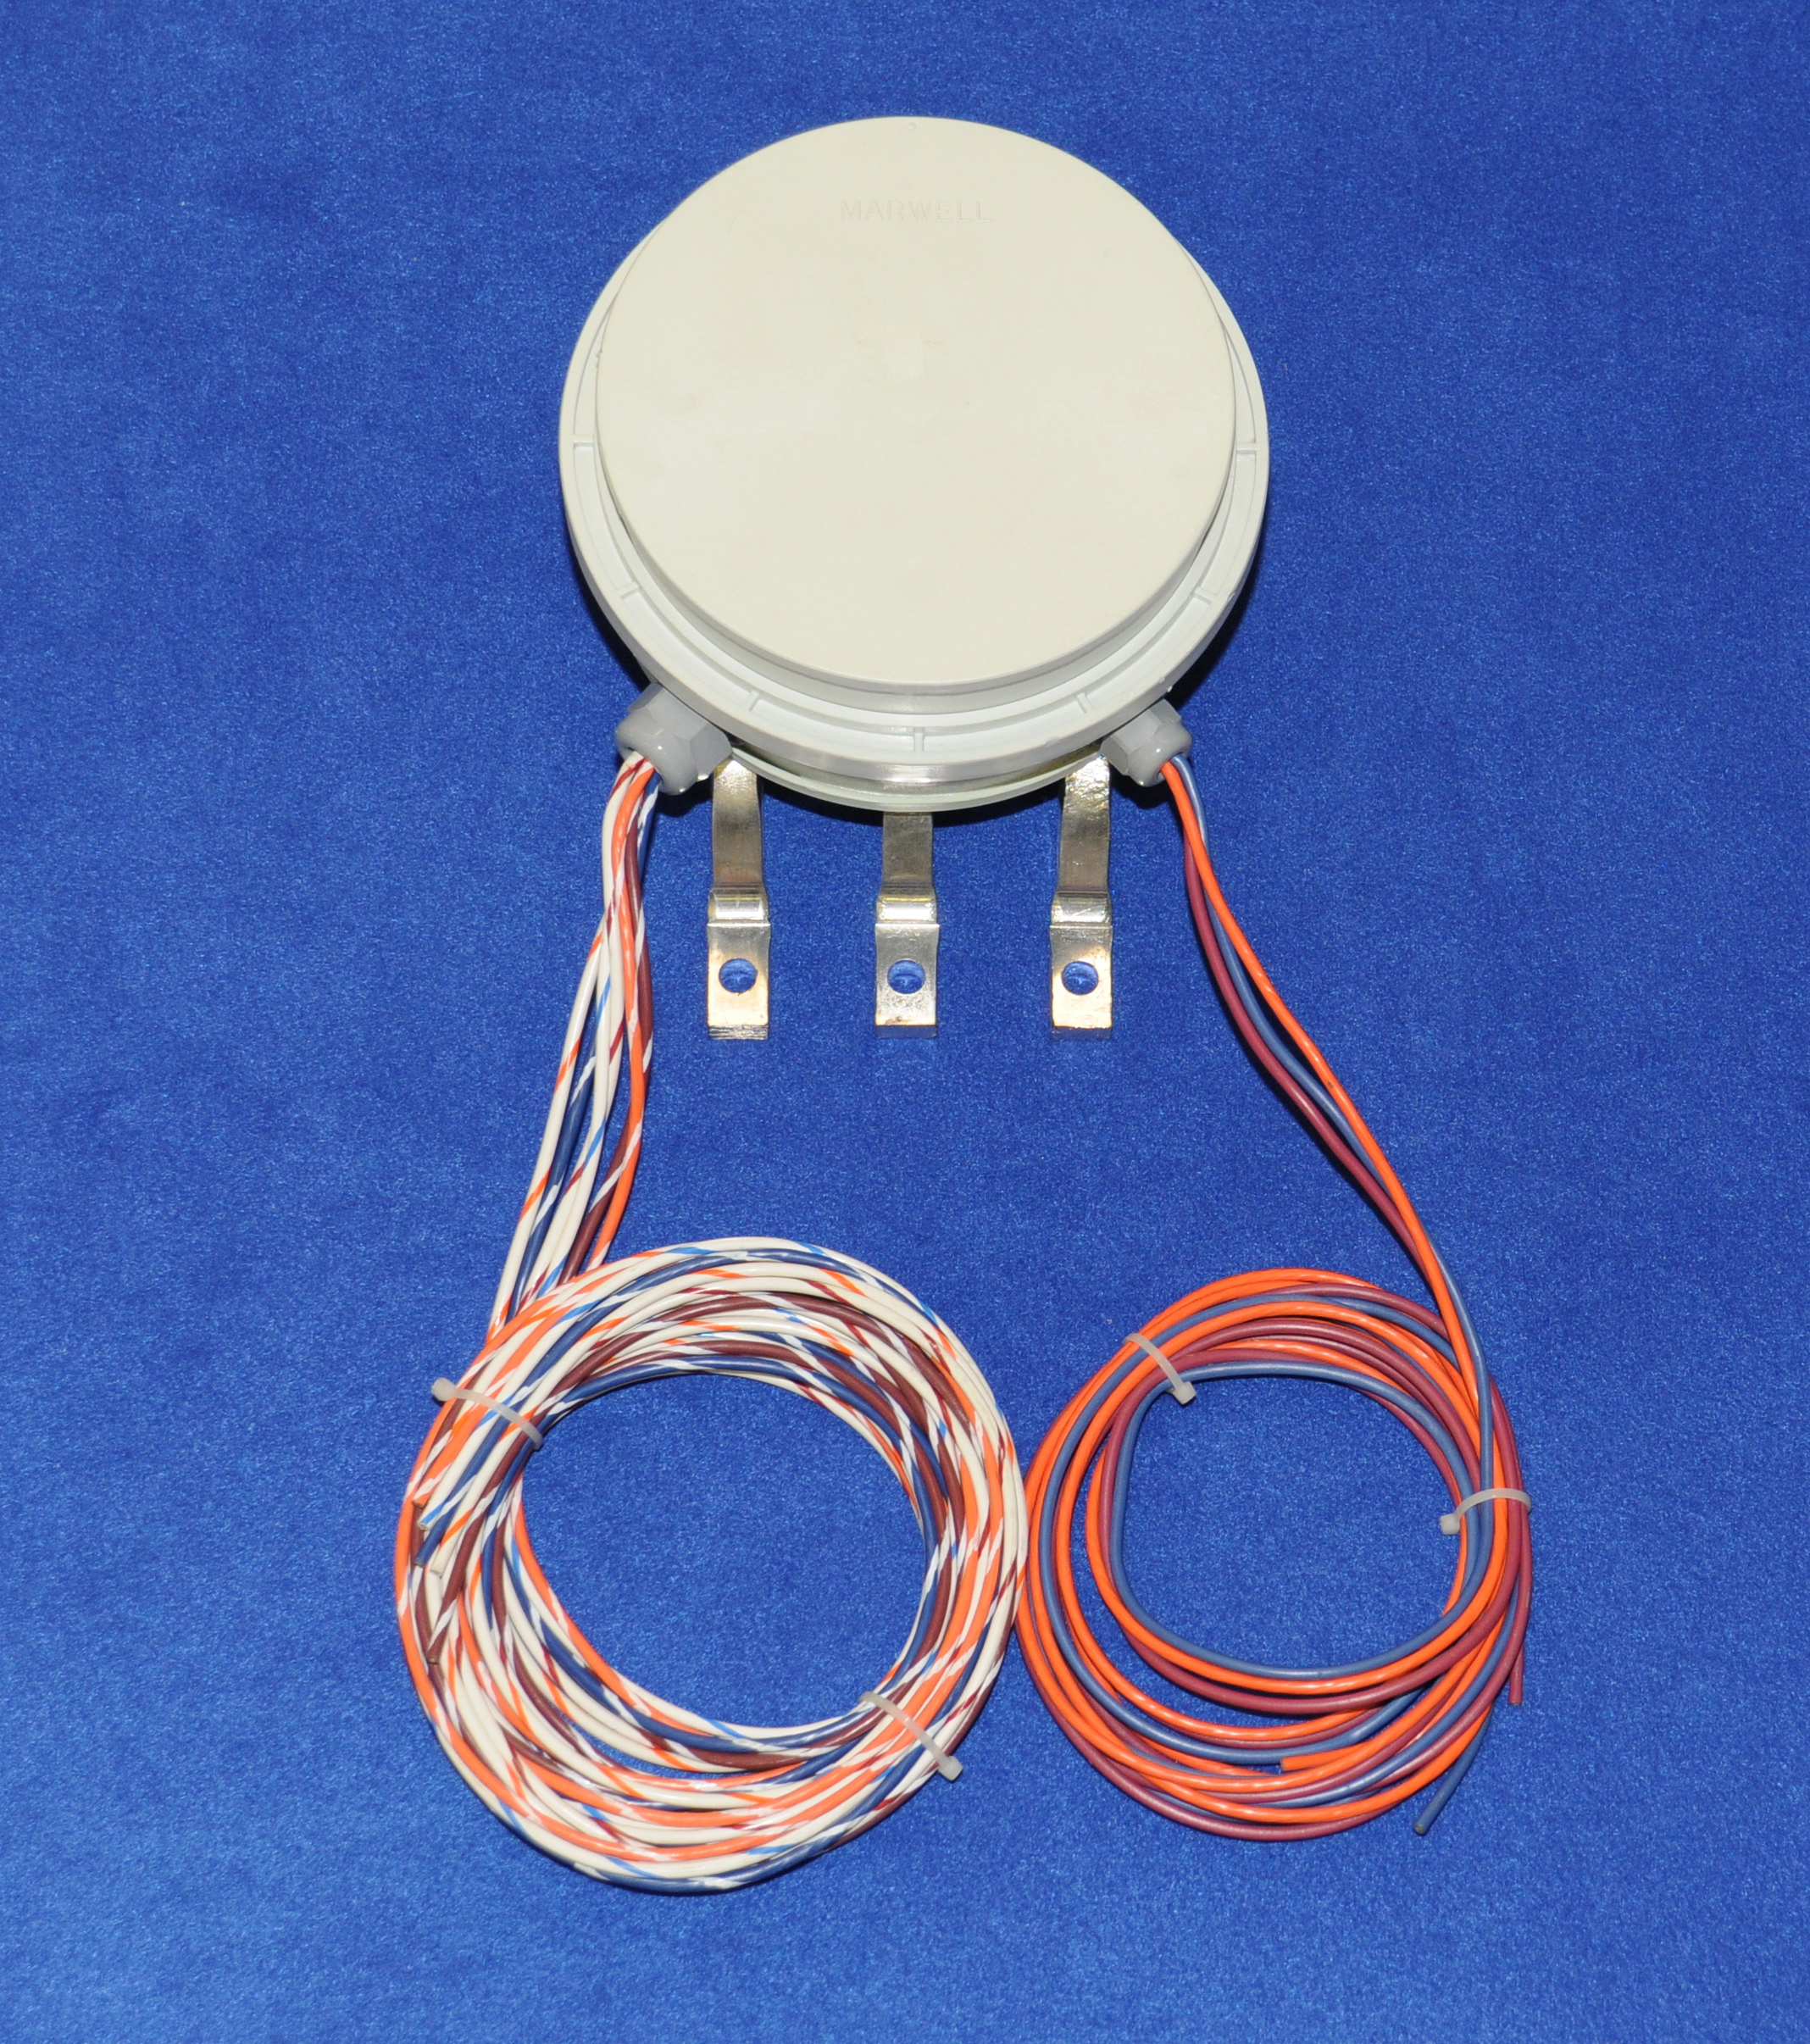 SP-K7-2-CT-Pack-3 enclosure with wires